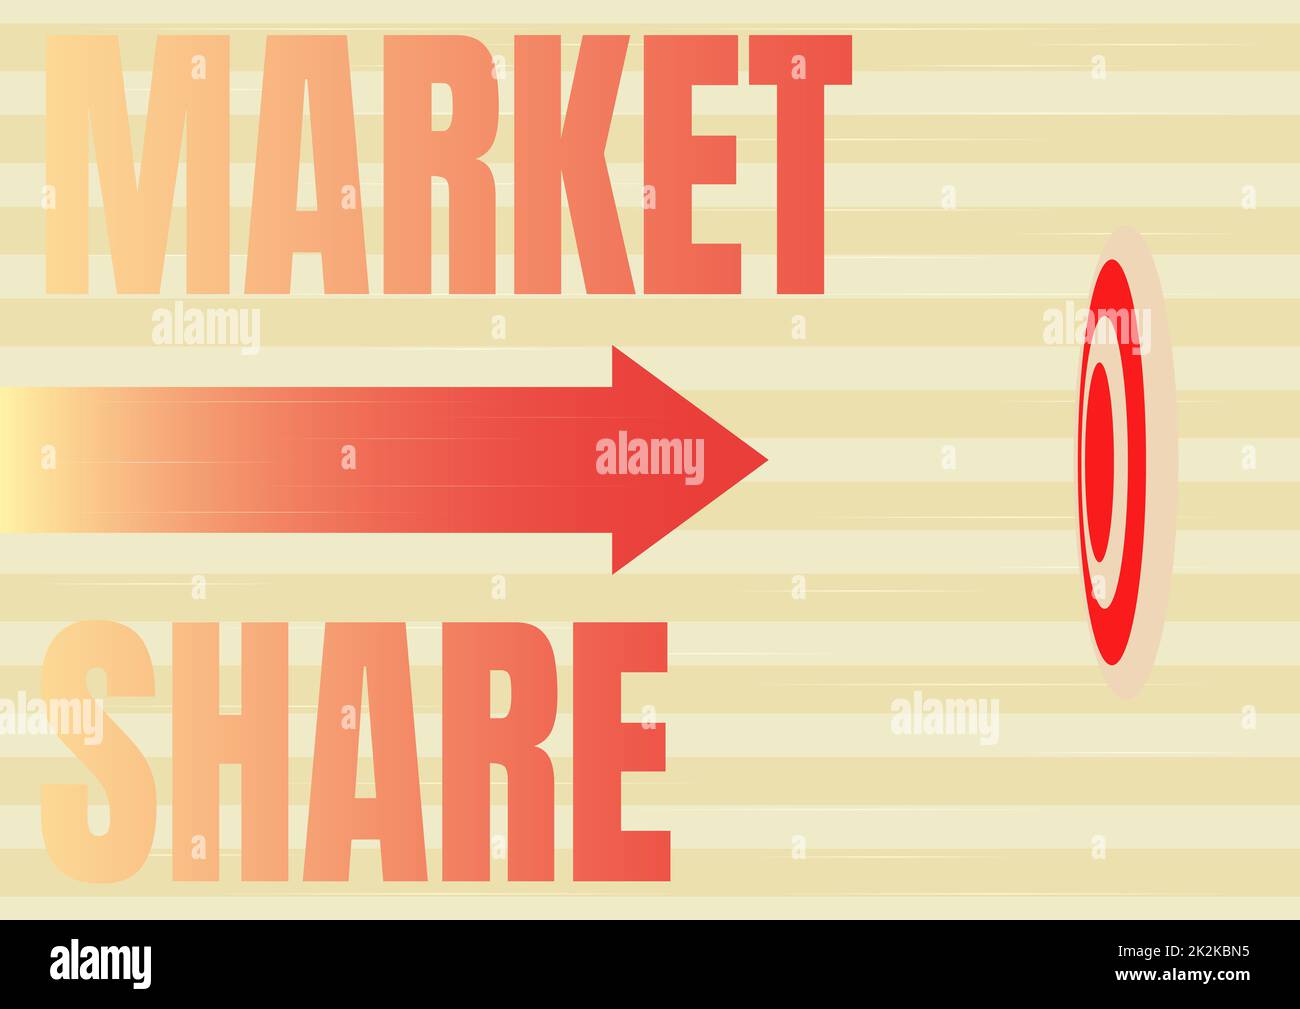 Inspiration showing sign Market Share. Business approach The portion of a market controlled by a particular company Arrow moving quickly towards aim target representing achieving goals. Stock Photo